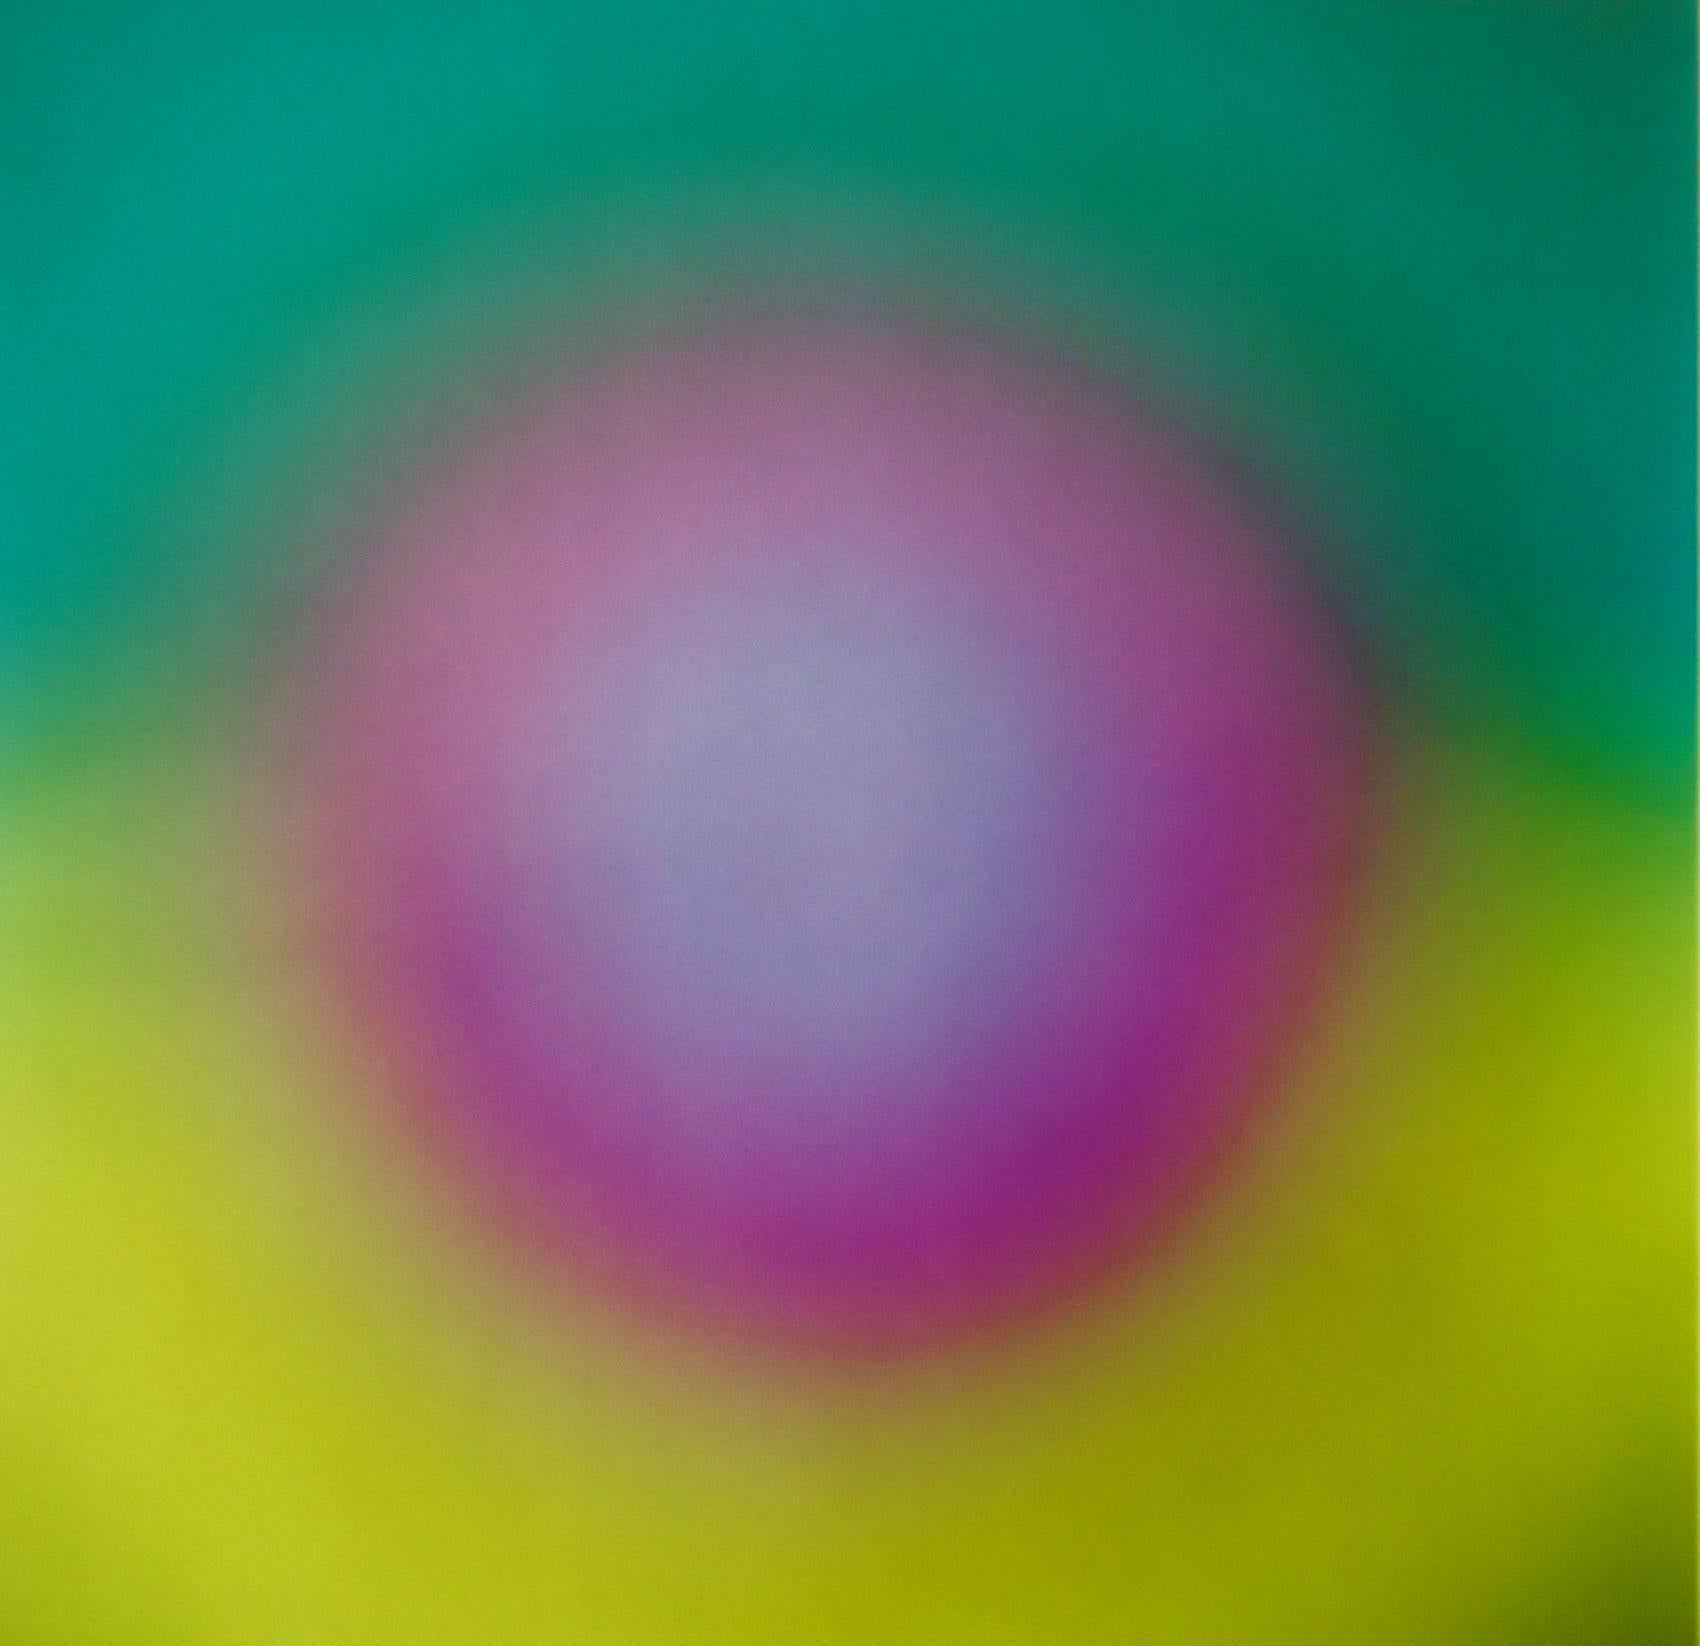 Bill Armstrong Abstract Photograph - Mandala #428, 2/5, 30" x 30", $5, 700 plus $640 for frame